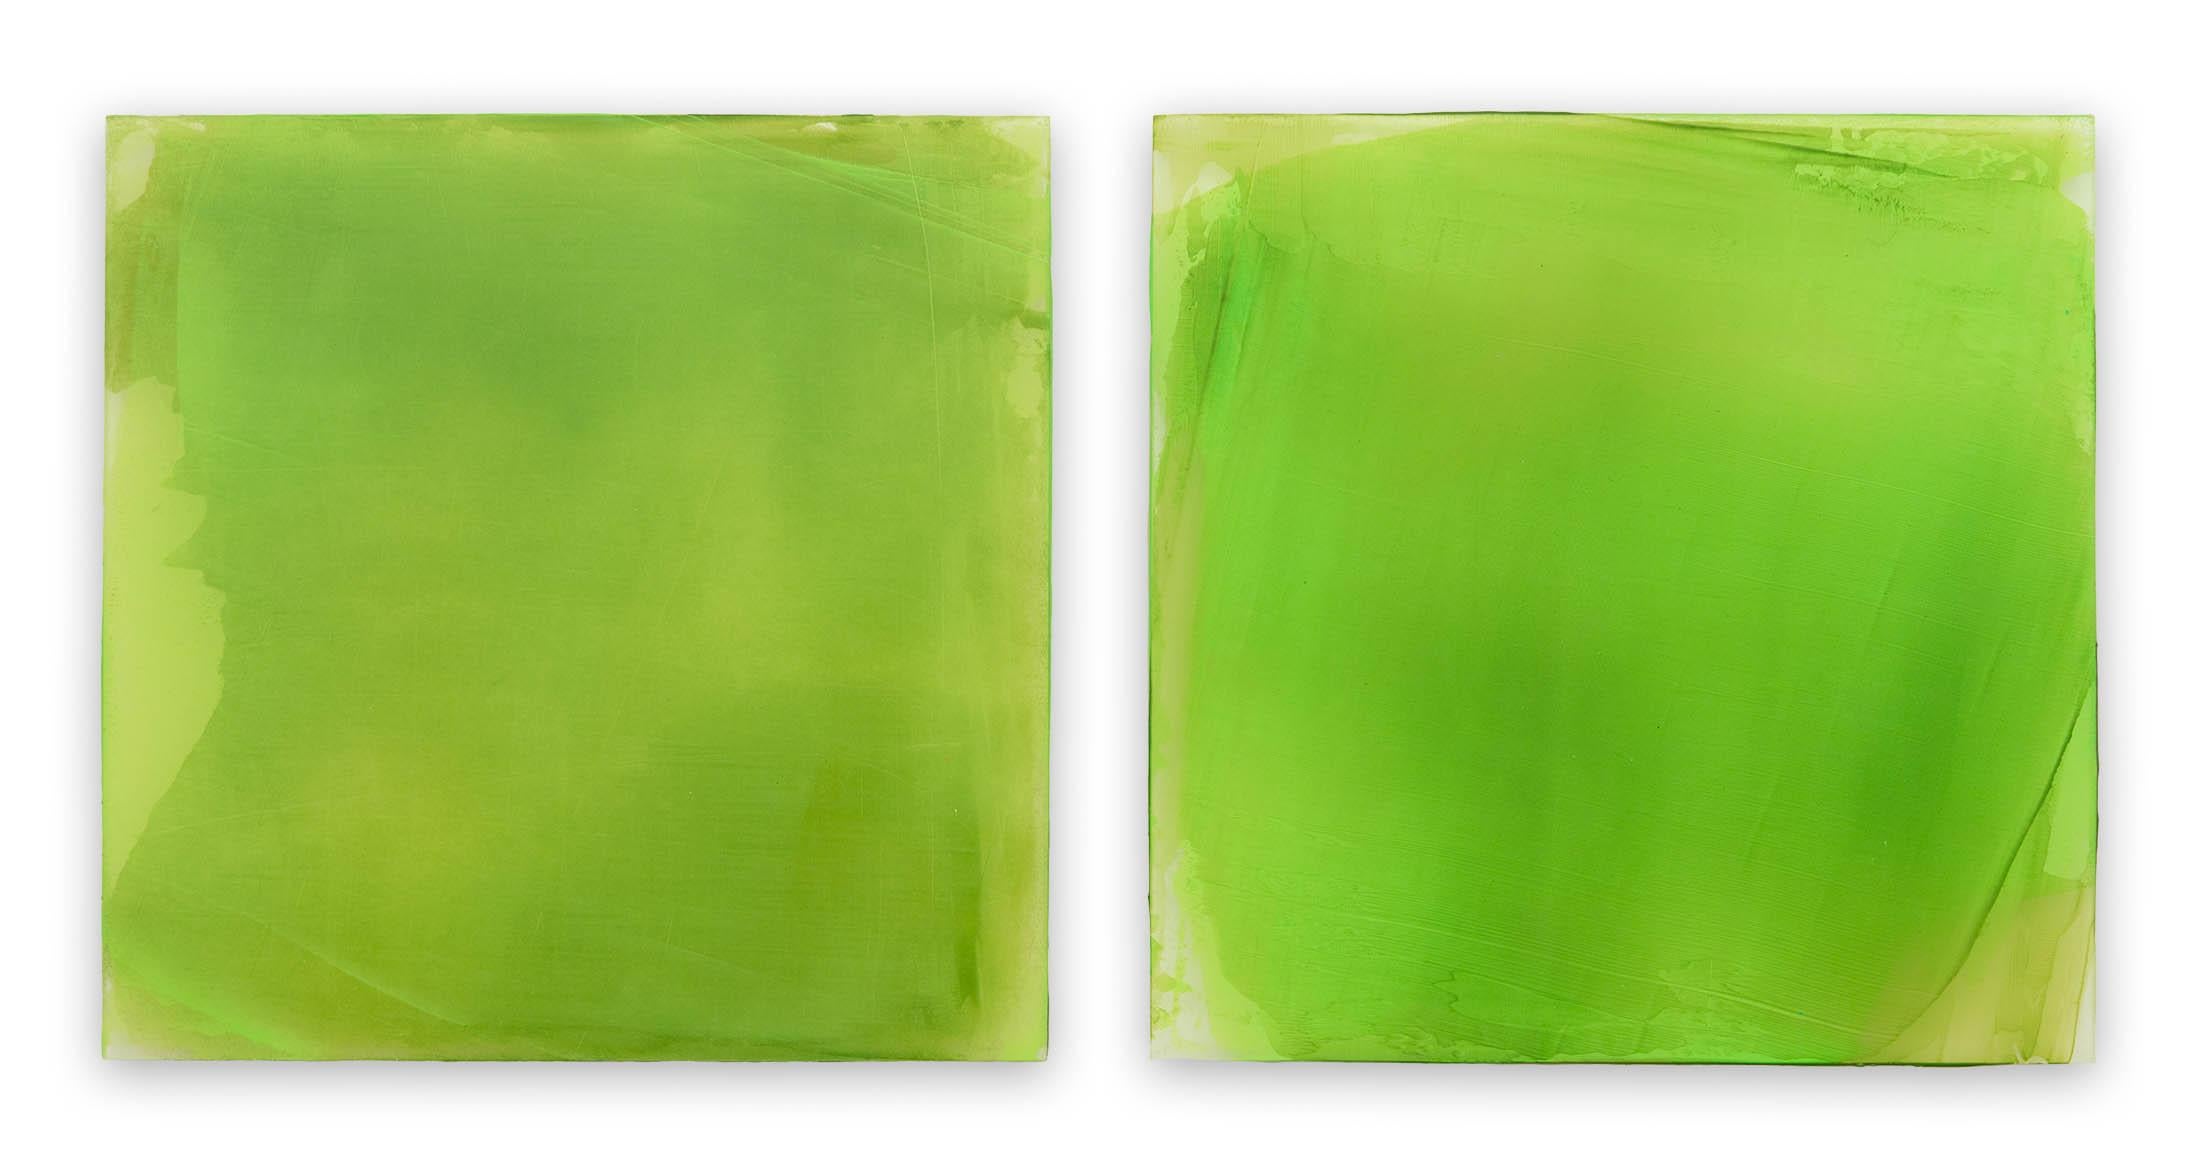 Greens (Abstract Painting)

Acrylic on acrylic panel - Unframed

Each panel is 9 inches square. They hang from a cleat system which makes them appear to “float” off the wall .25 of an inch.

In this ongoing series, Ramsay explores reversed